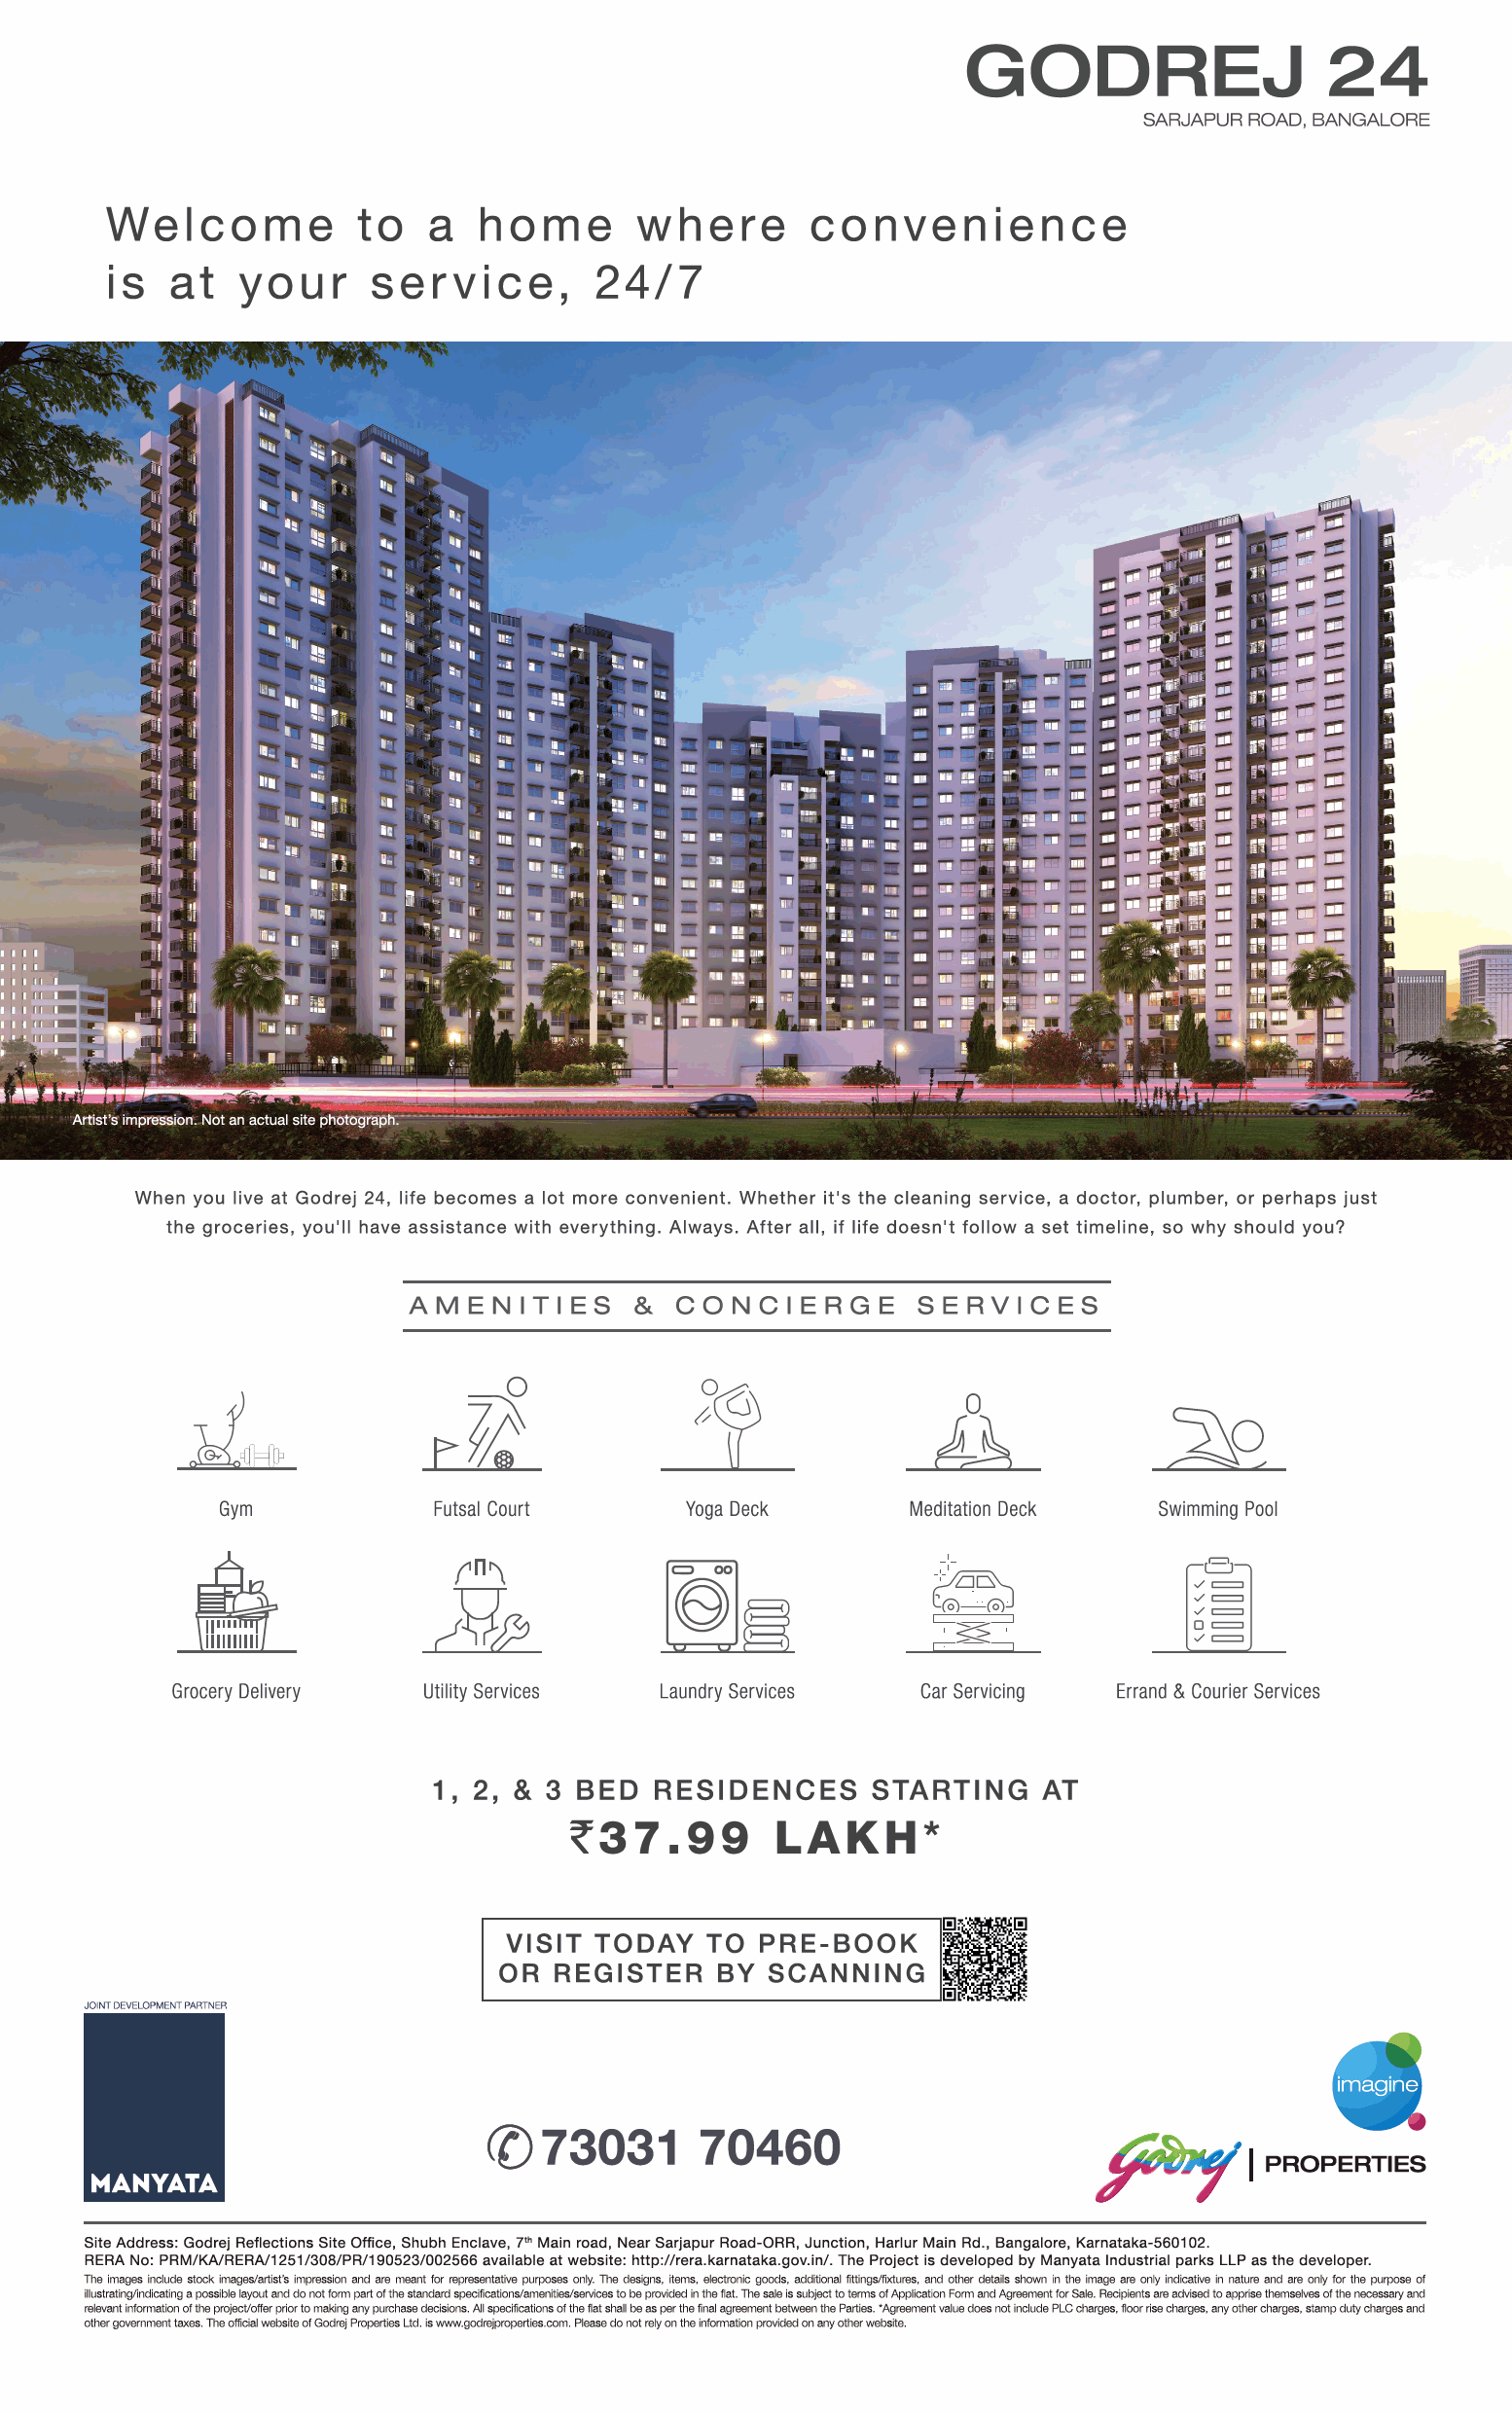 godrej-properties-1-2-and-3-bed-residences-starting-at-rs-37.99-lakh-ad-bangalore-times-31-05-2019.png